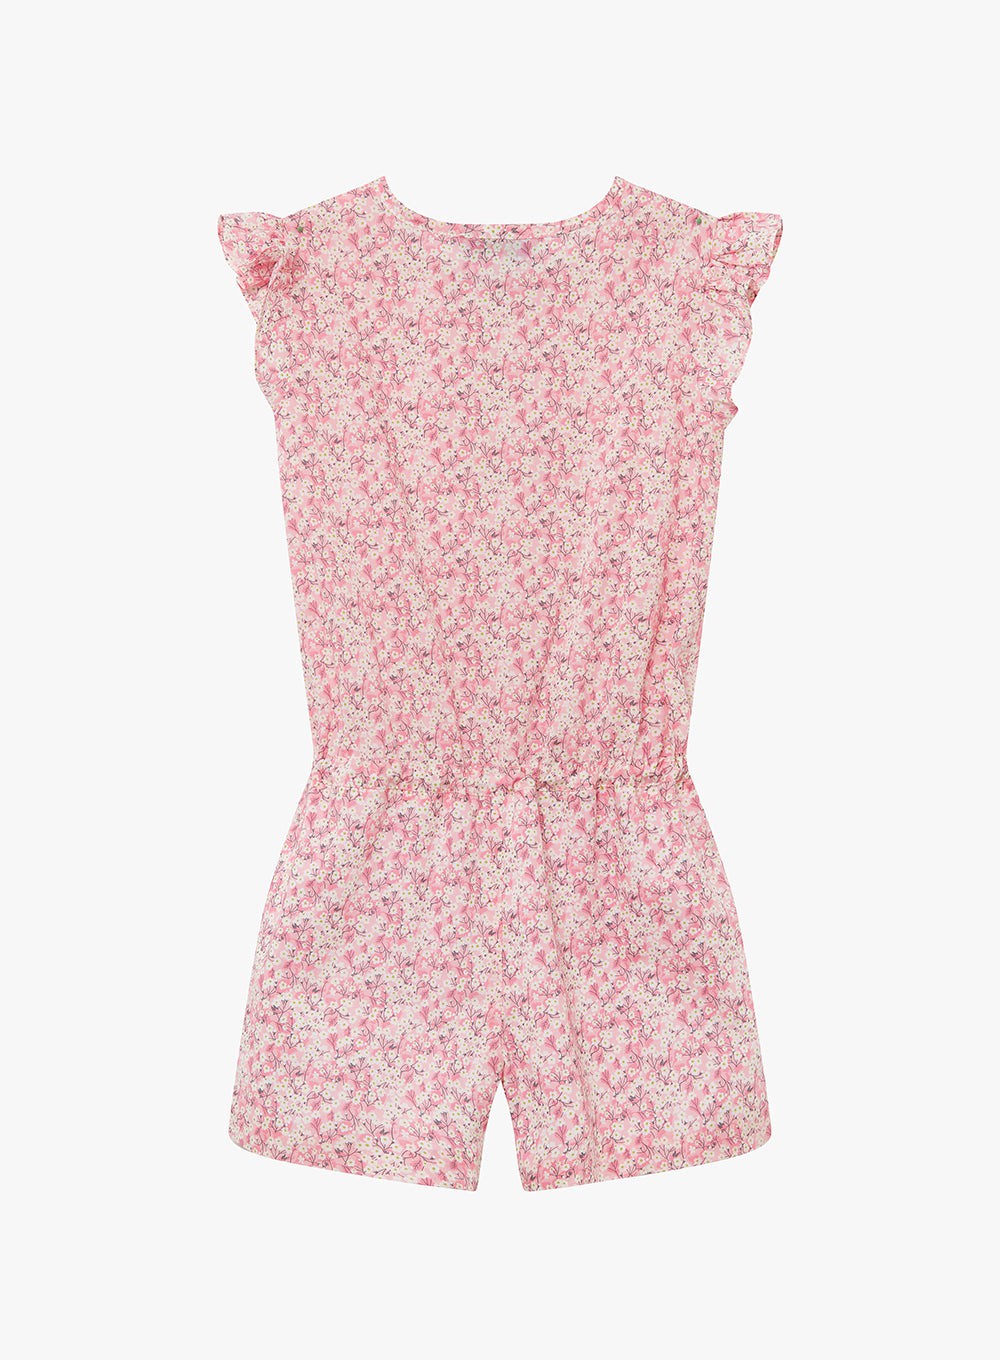 Lily Rose Girls Blossom Playsuit Pink Blossom | Trotters London ...